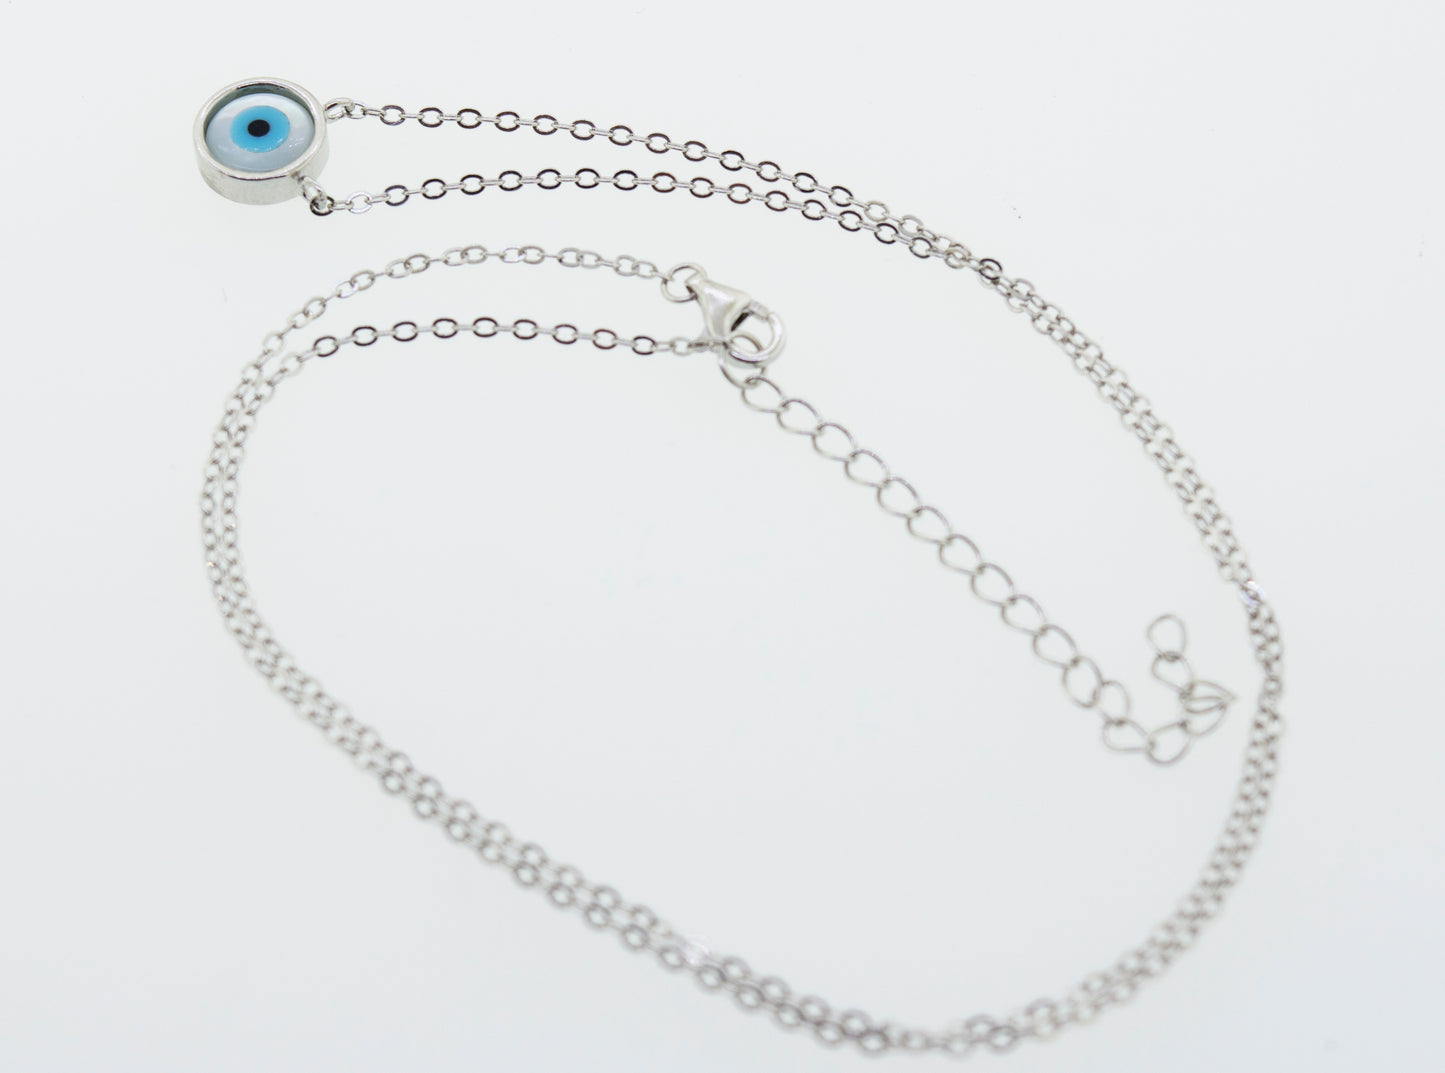 An adjustable chain necklace with a Simple Evil Eye pendant, crafted in .925 Sterling Silver by Super Silver.